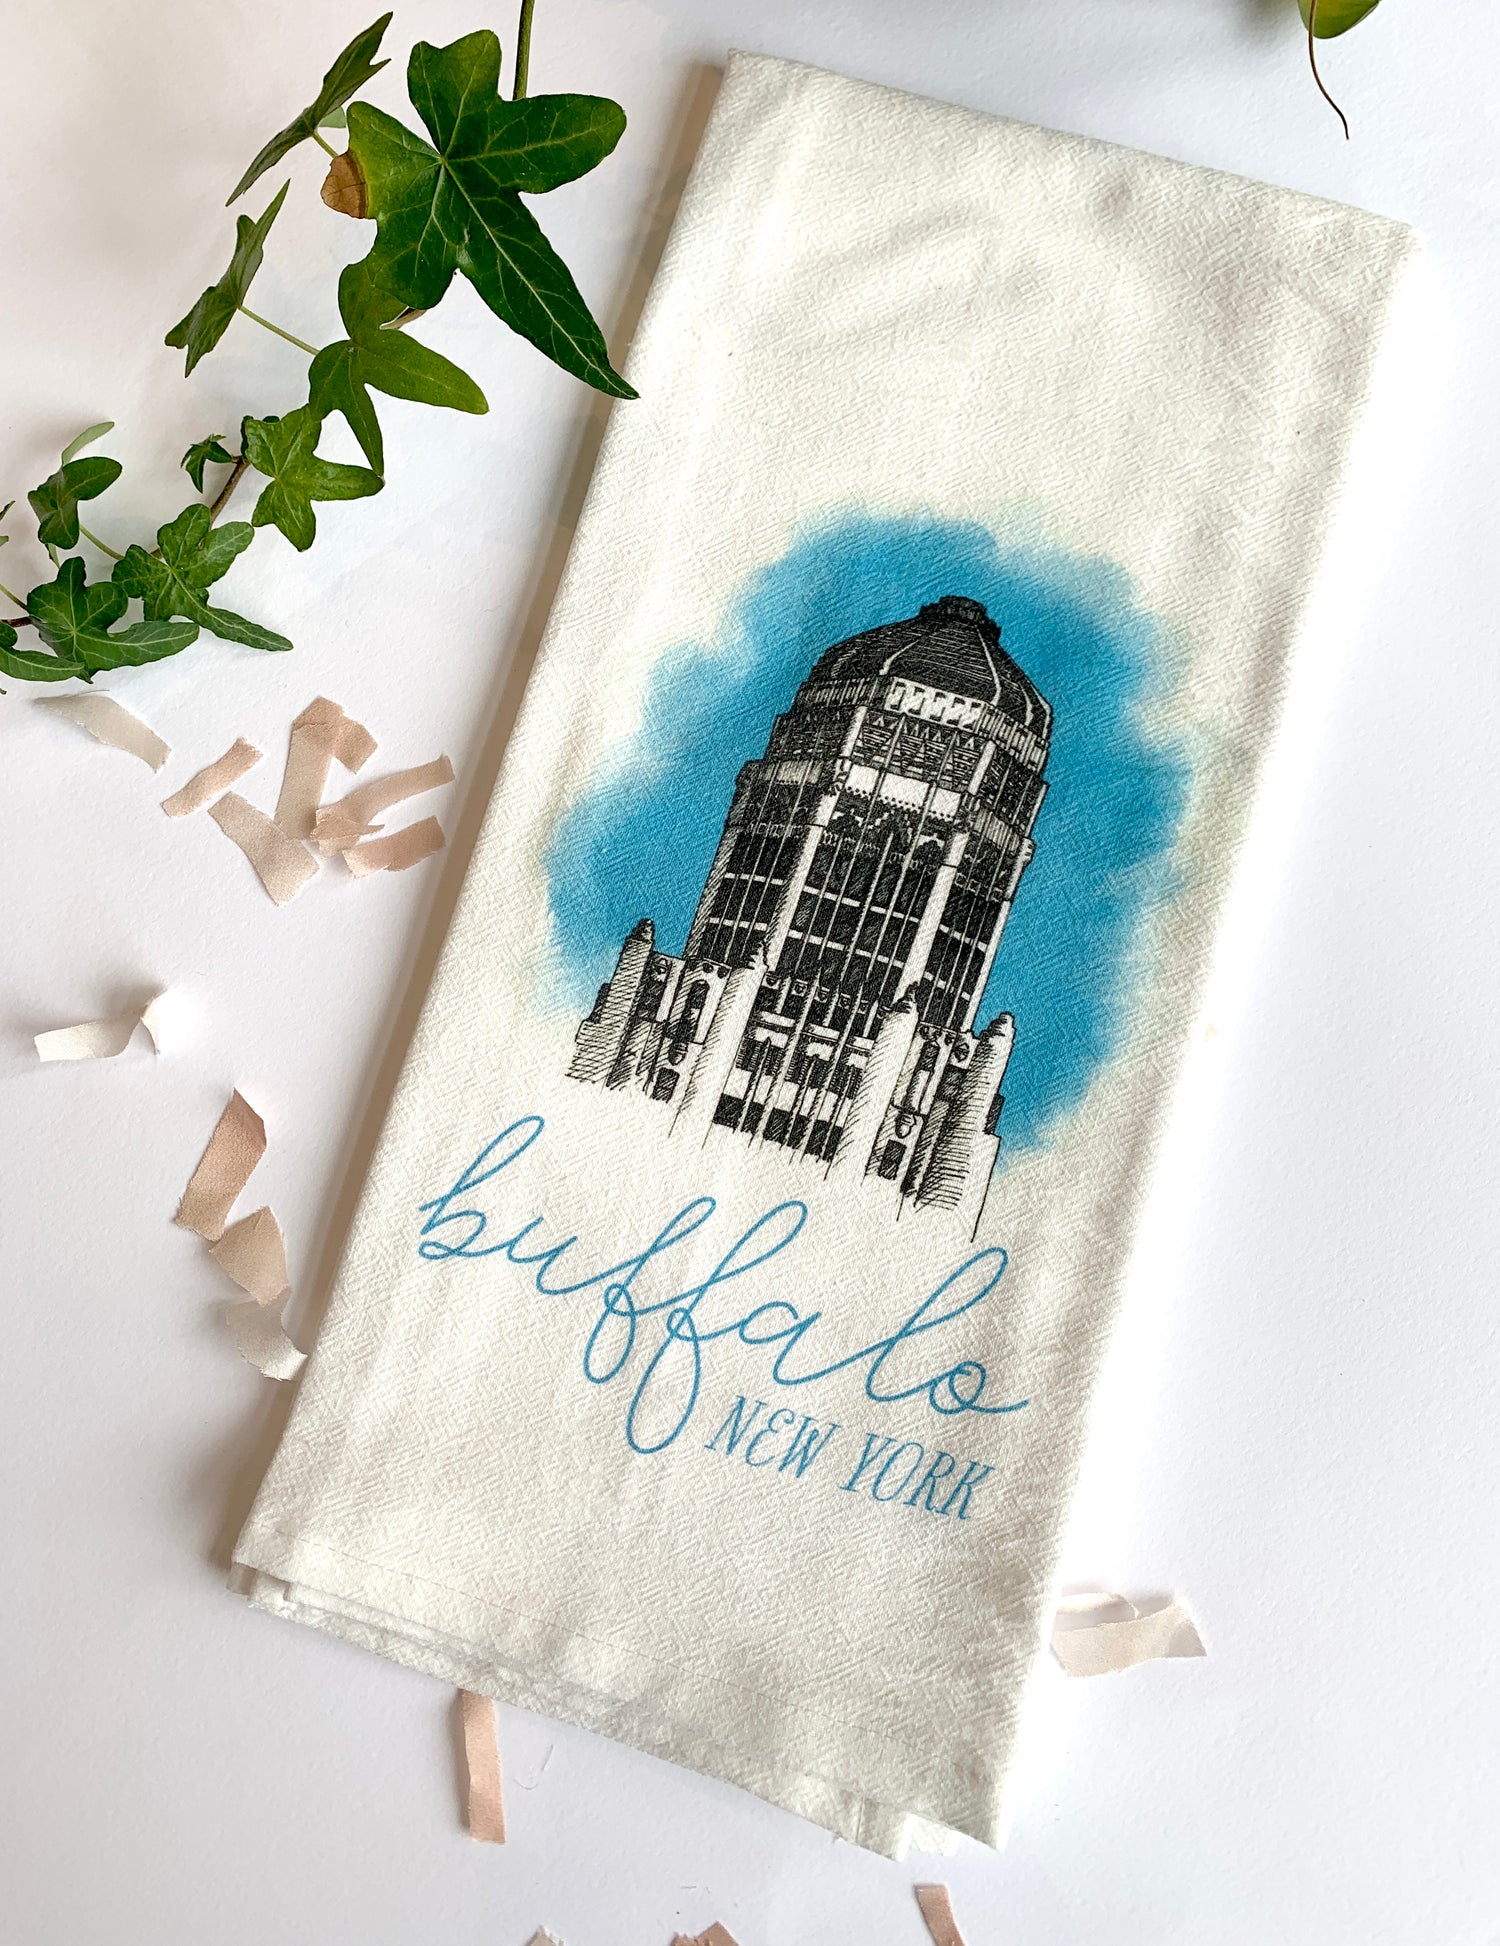 White tea towel with city hall that says "buffalo new york" by Rust Belt Love